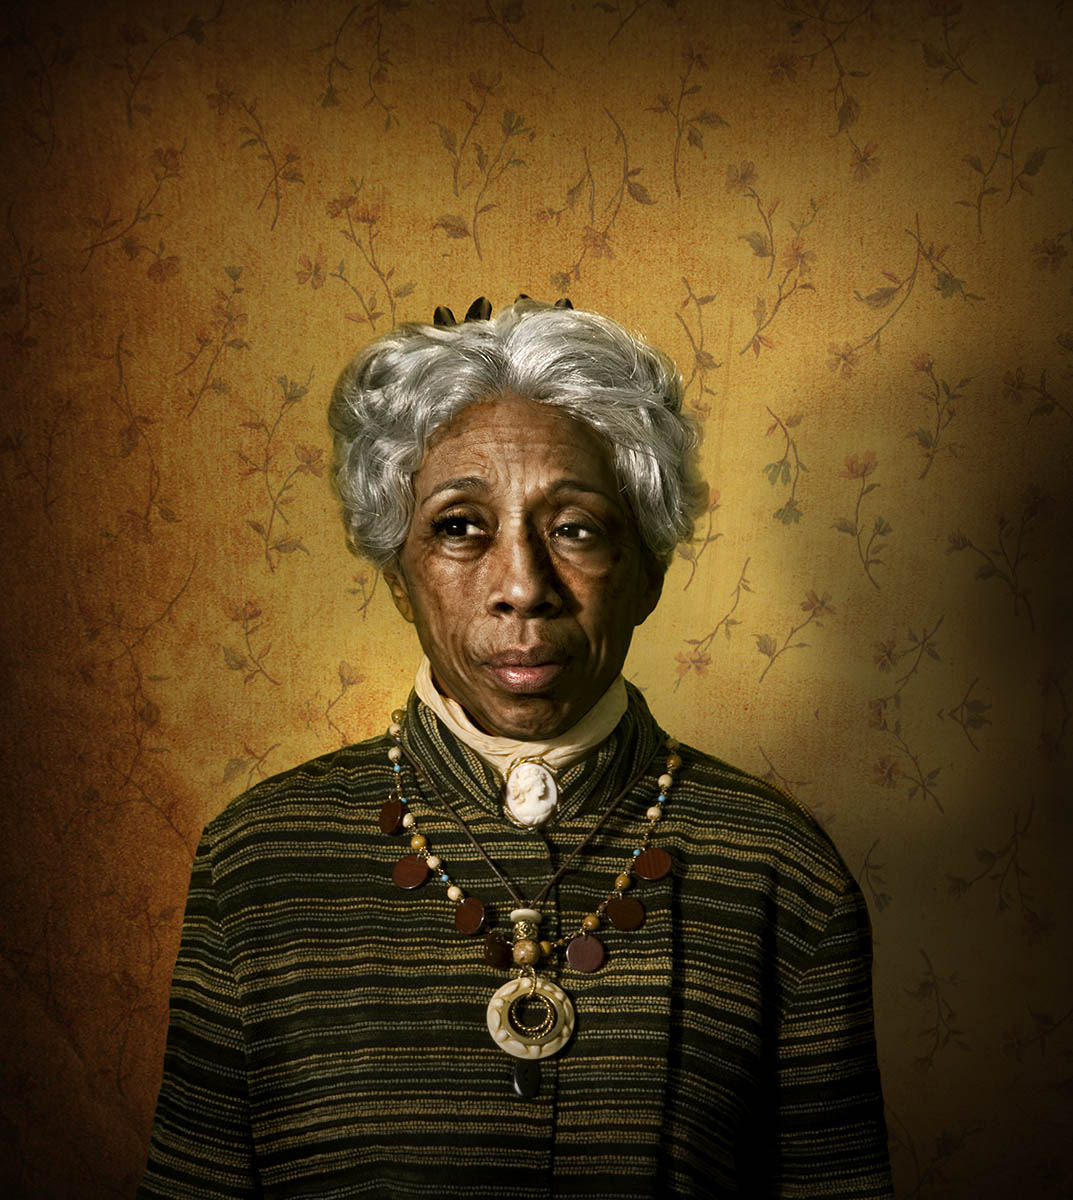 Aunt Esther, a chracter from AUgust WIlson's cycle of plays is portrayed as an old black woman with gray hair, exotic necklaces, and modest, timeless dress with a cameo broach at her throat.